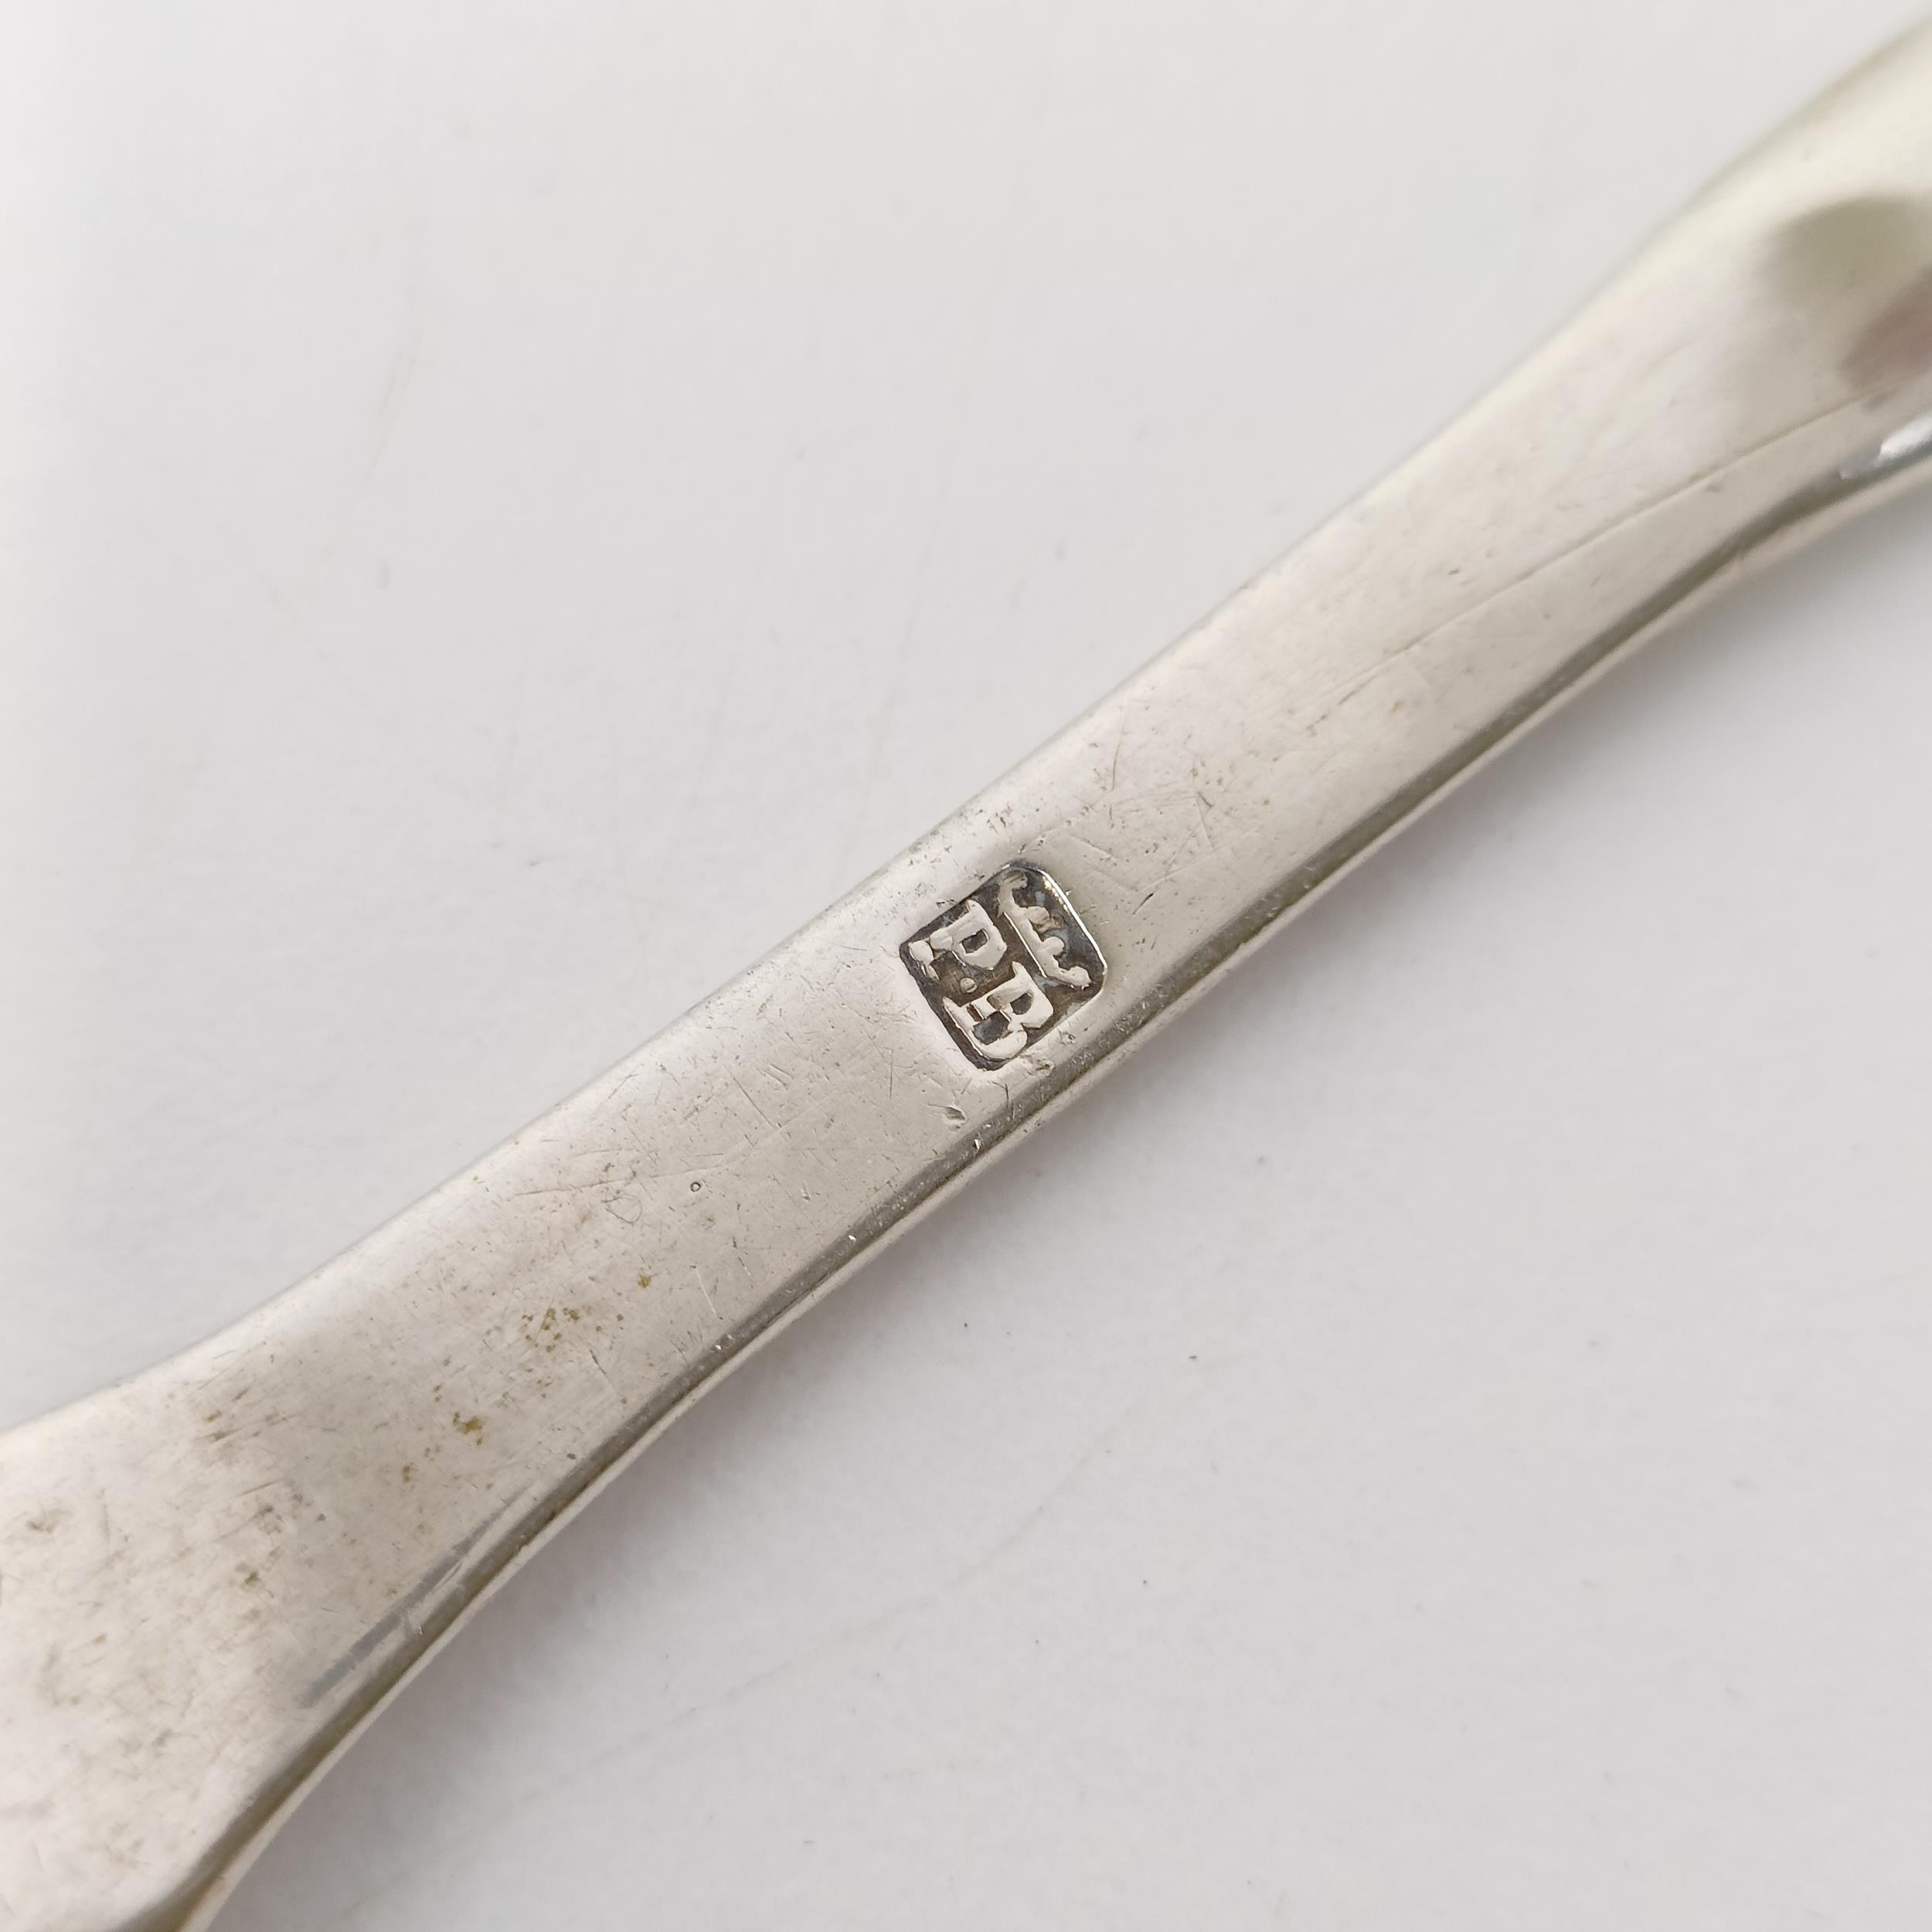 An 18th/19th century silver marrow scoop, makers mark only, 0.9 ozt - Image 6 of 6